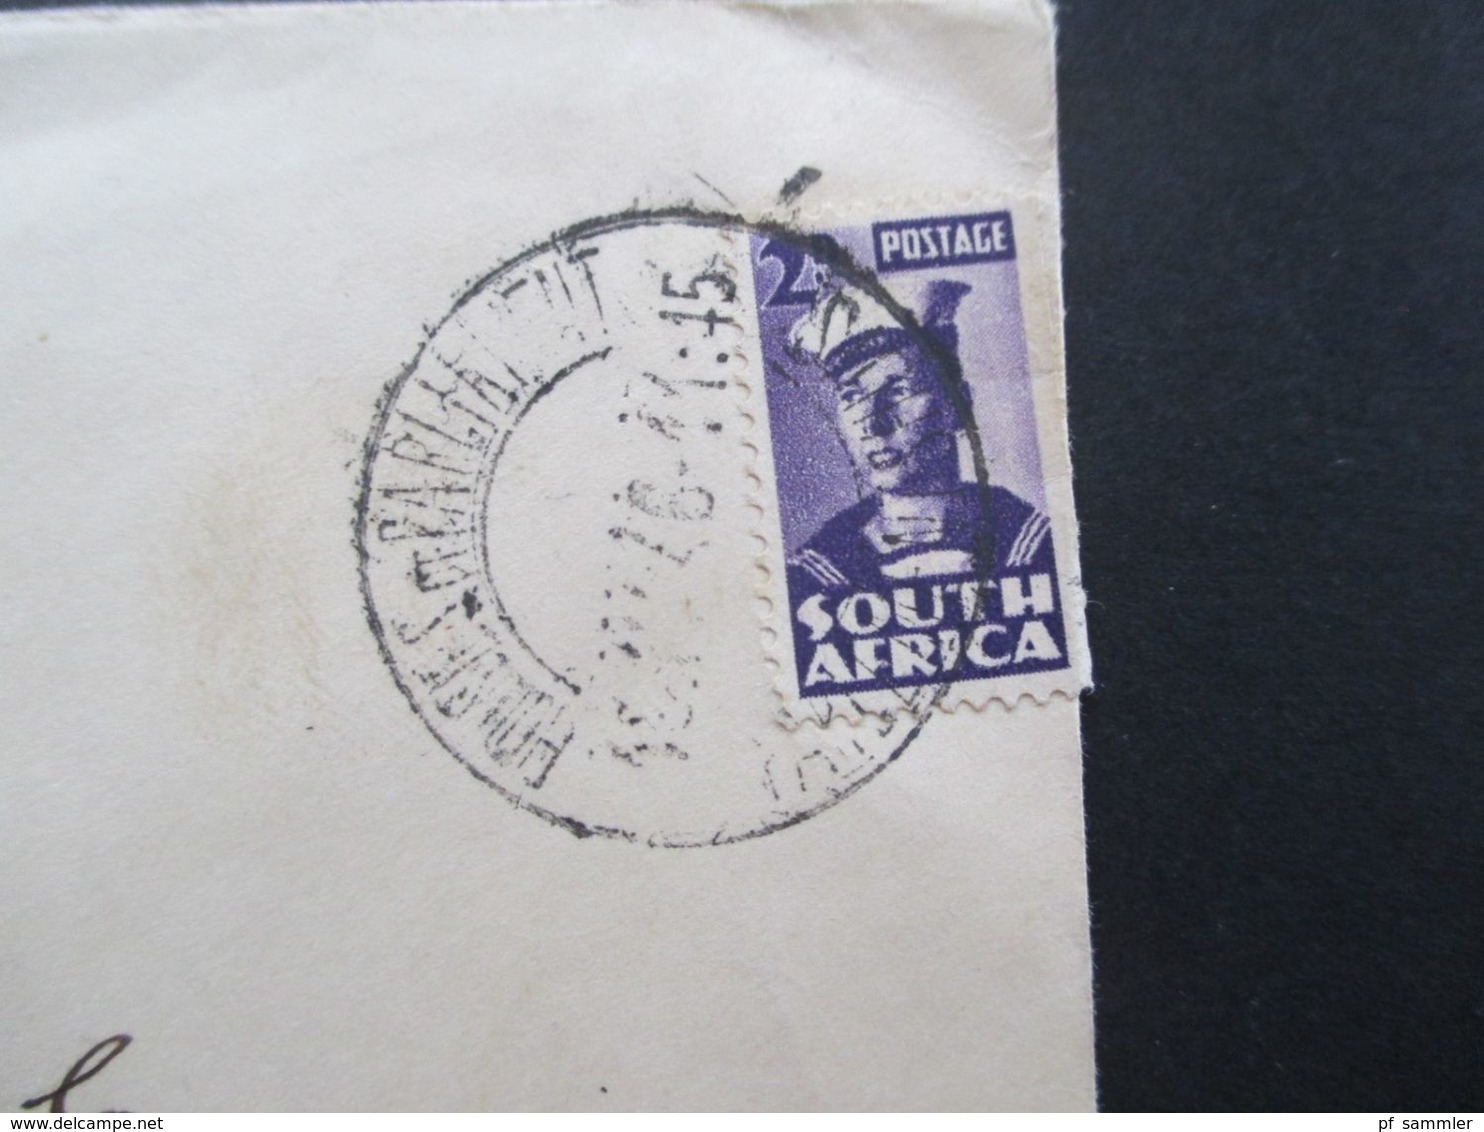 Südafrika 1945 ?!? Beleg Mit Wappen House Of Assembly Cape Town Und Stempel Houses Of Parliament - Covers & Documents